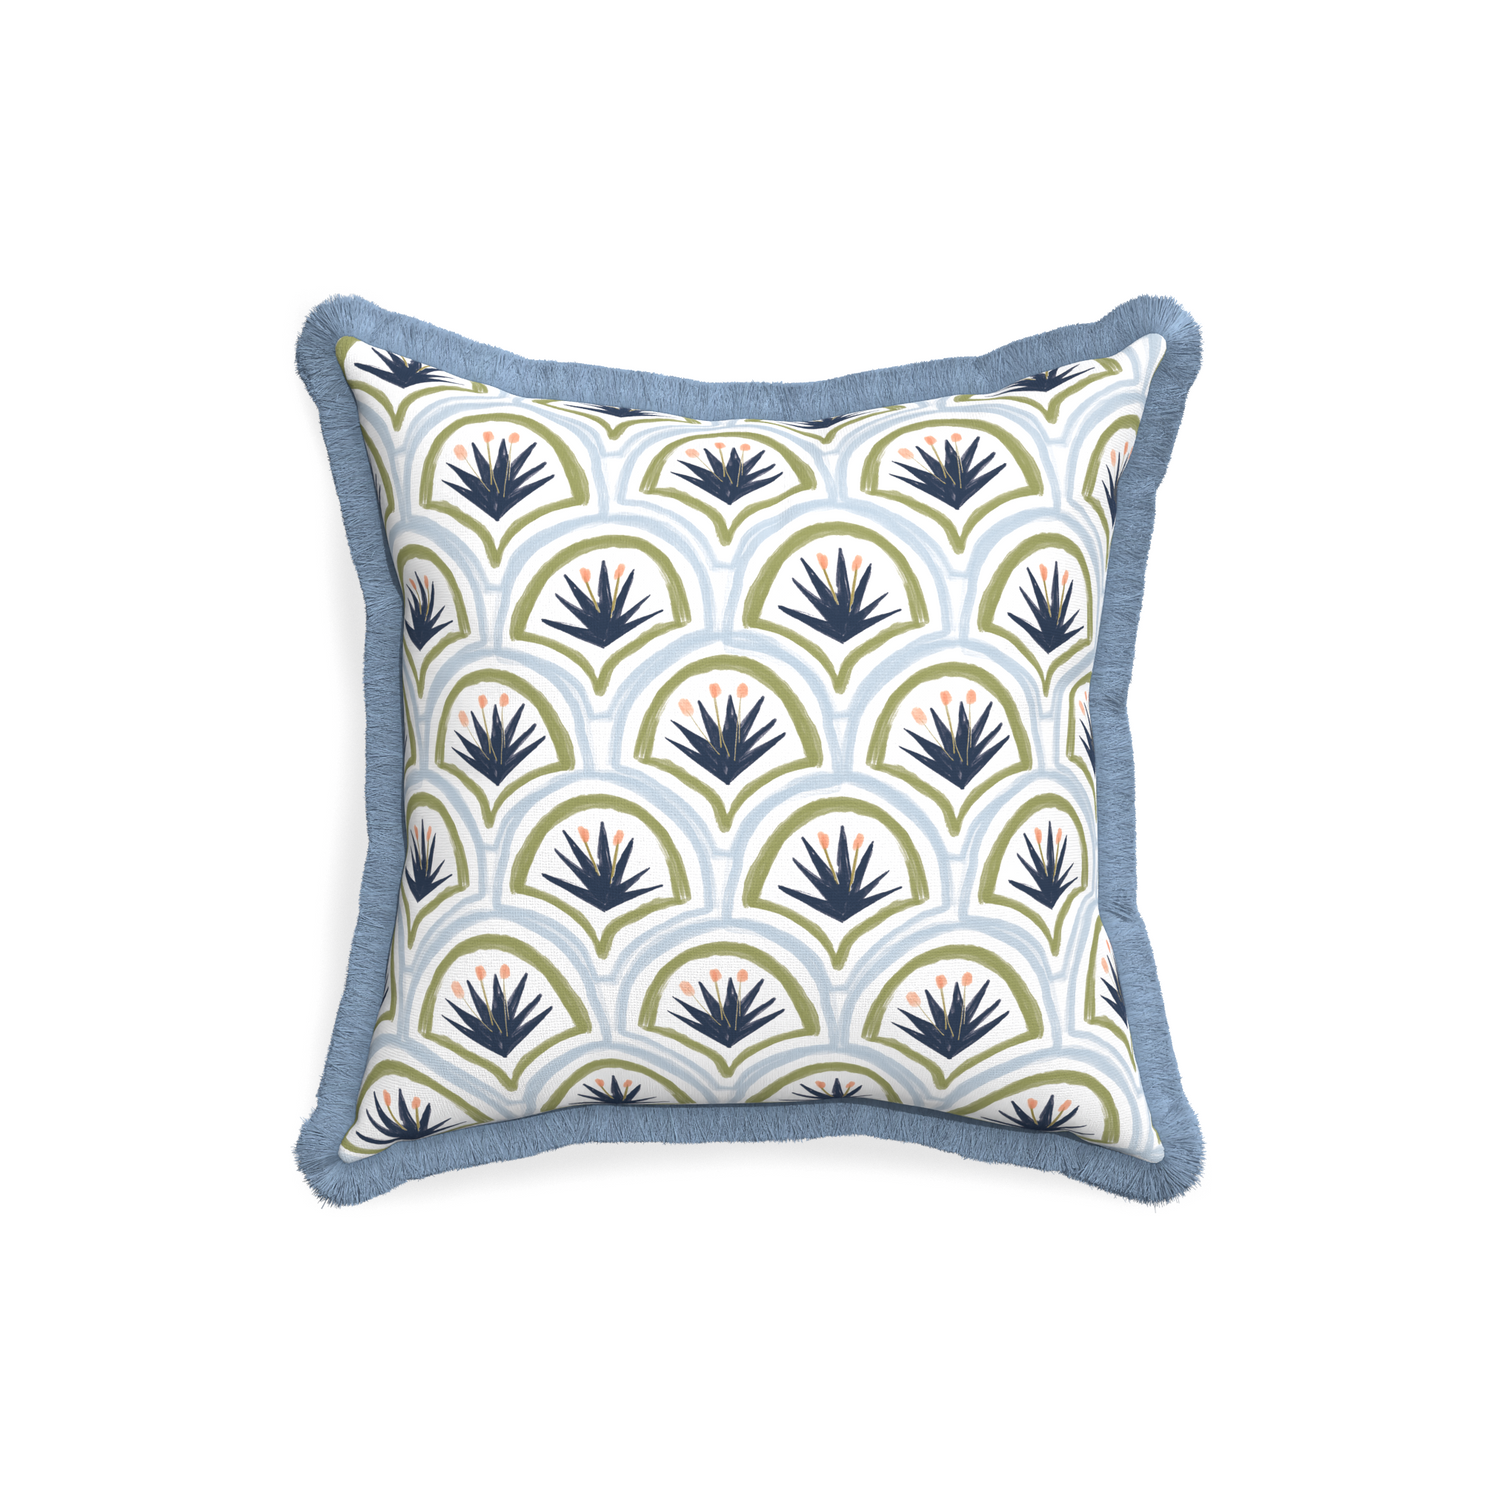 18-square thatcher midnight custom art deco palm patternpillow with sky fringe on white background